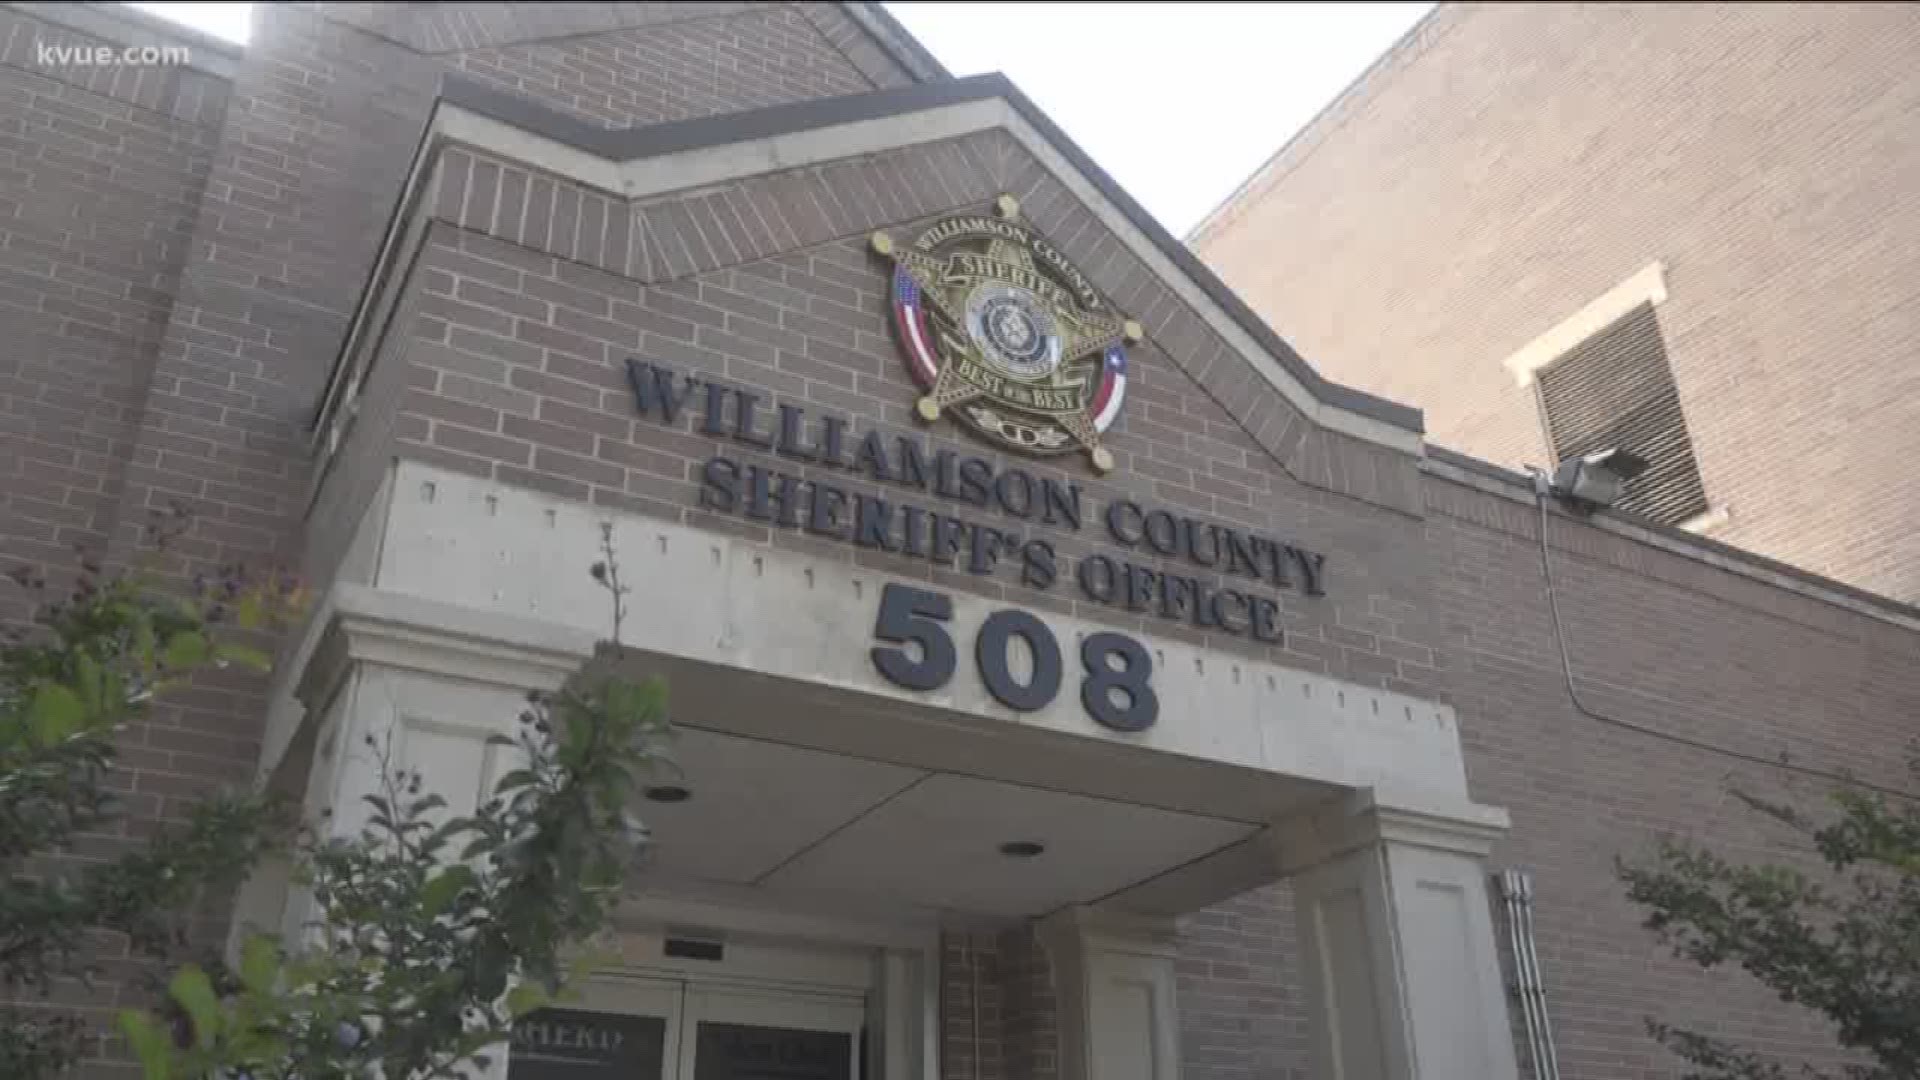 The partnership between Williamson County and A&E's "Live PD" is over.